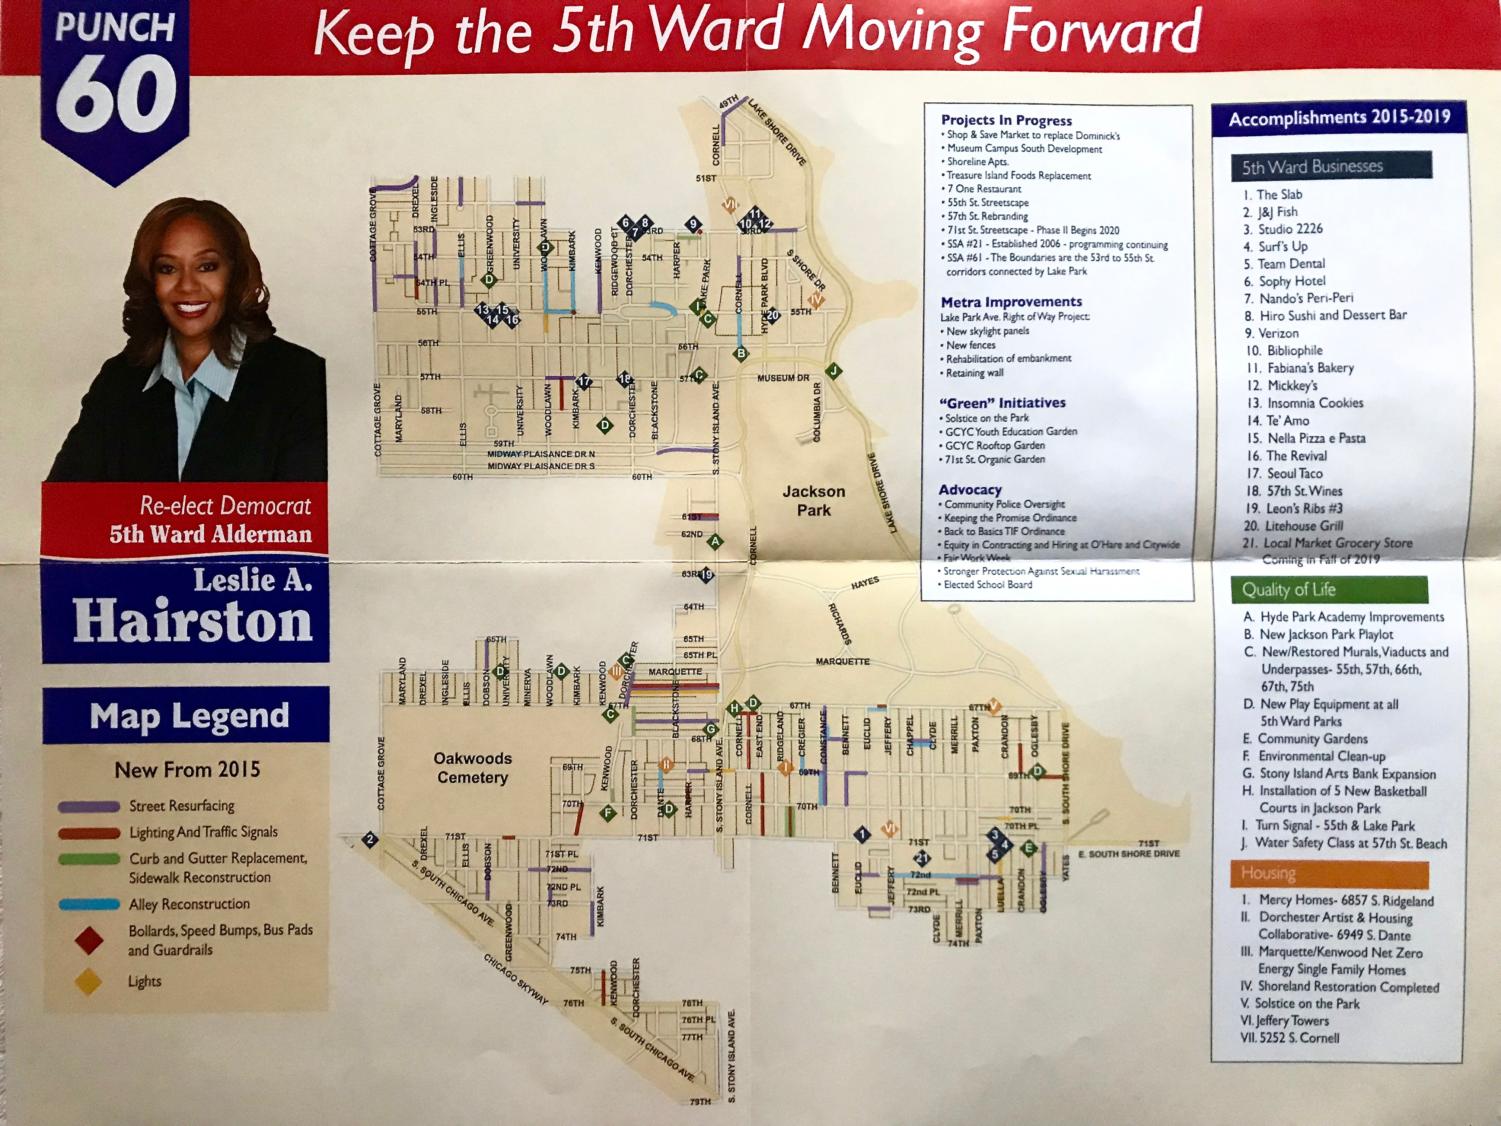 A map of Hairston's projects in the Fifth Ward, from Hairston's office.